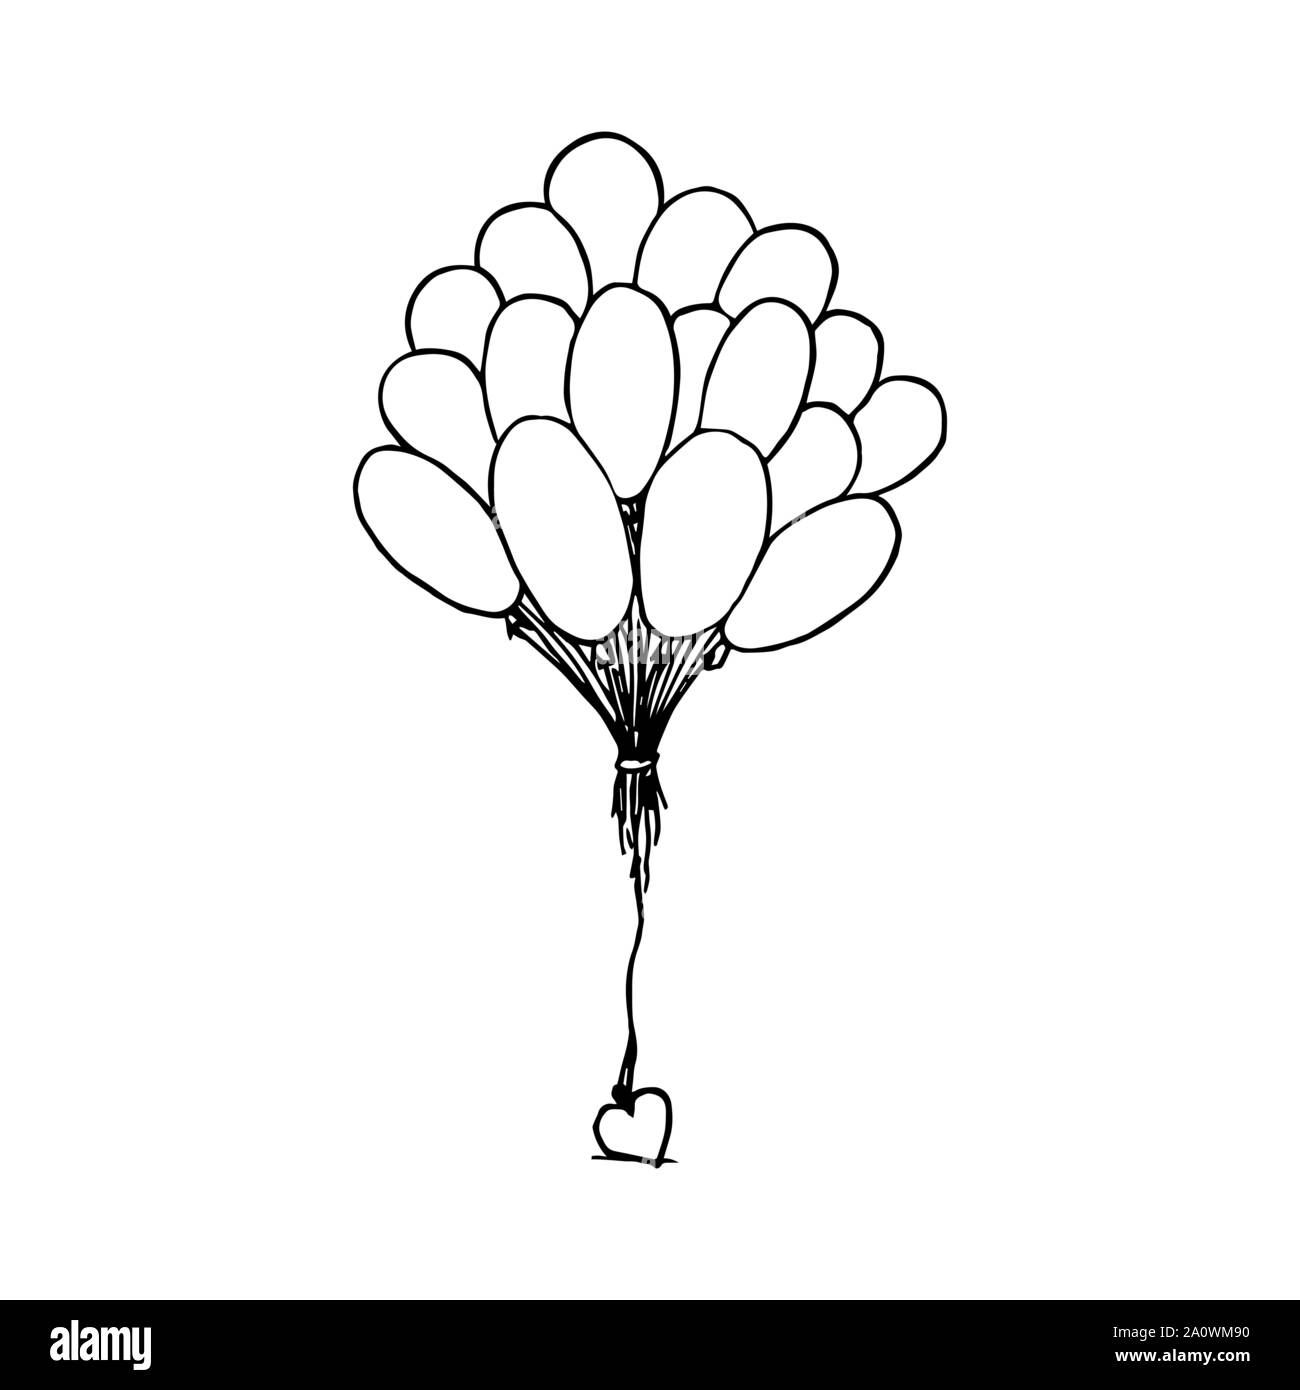 Bunch of balloons tied up together with a heart. Black outline on white background. Picture can be used in greeting cards, posters, flyers, banners, logo, further design etc. Vector illustration. EPS10 Stock Vector